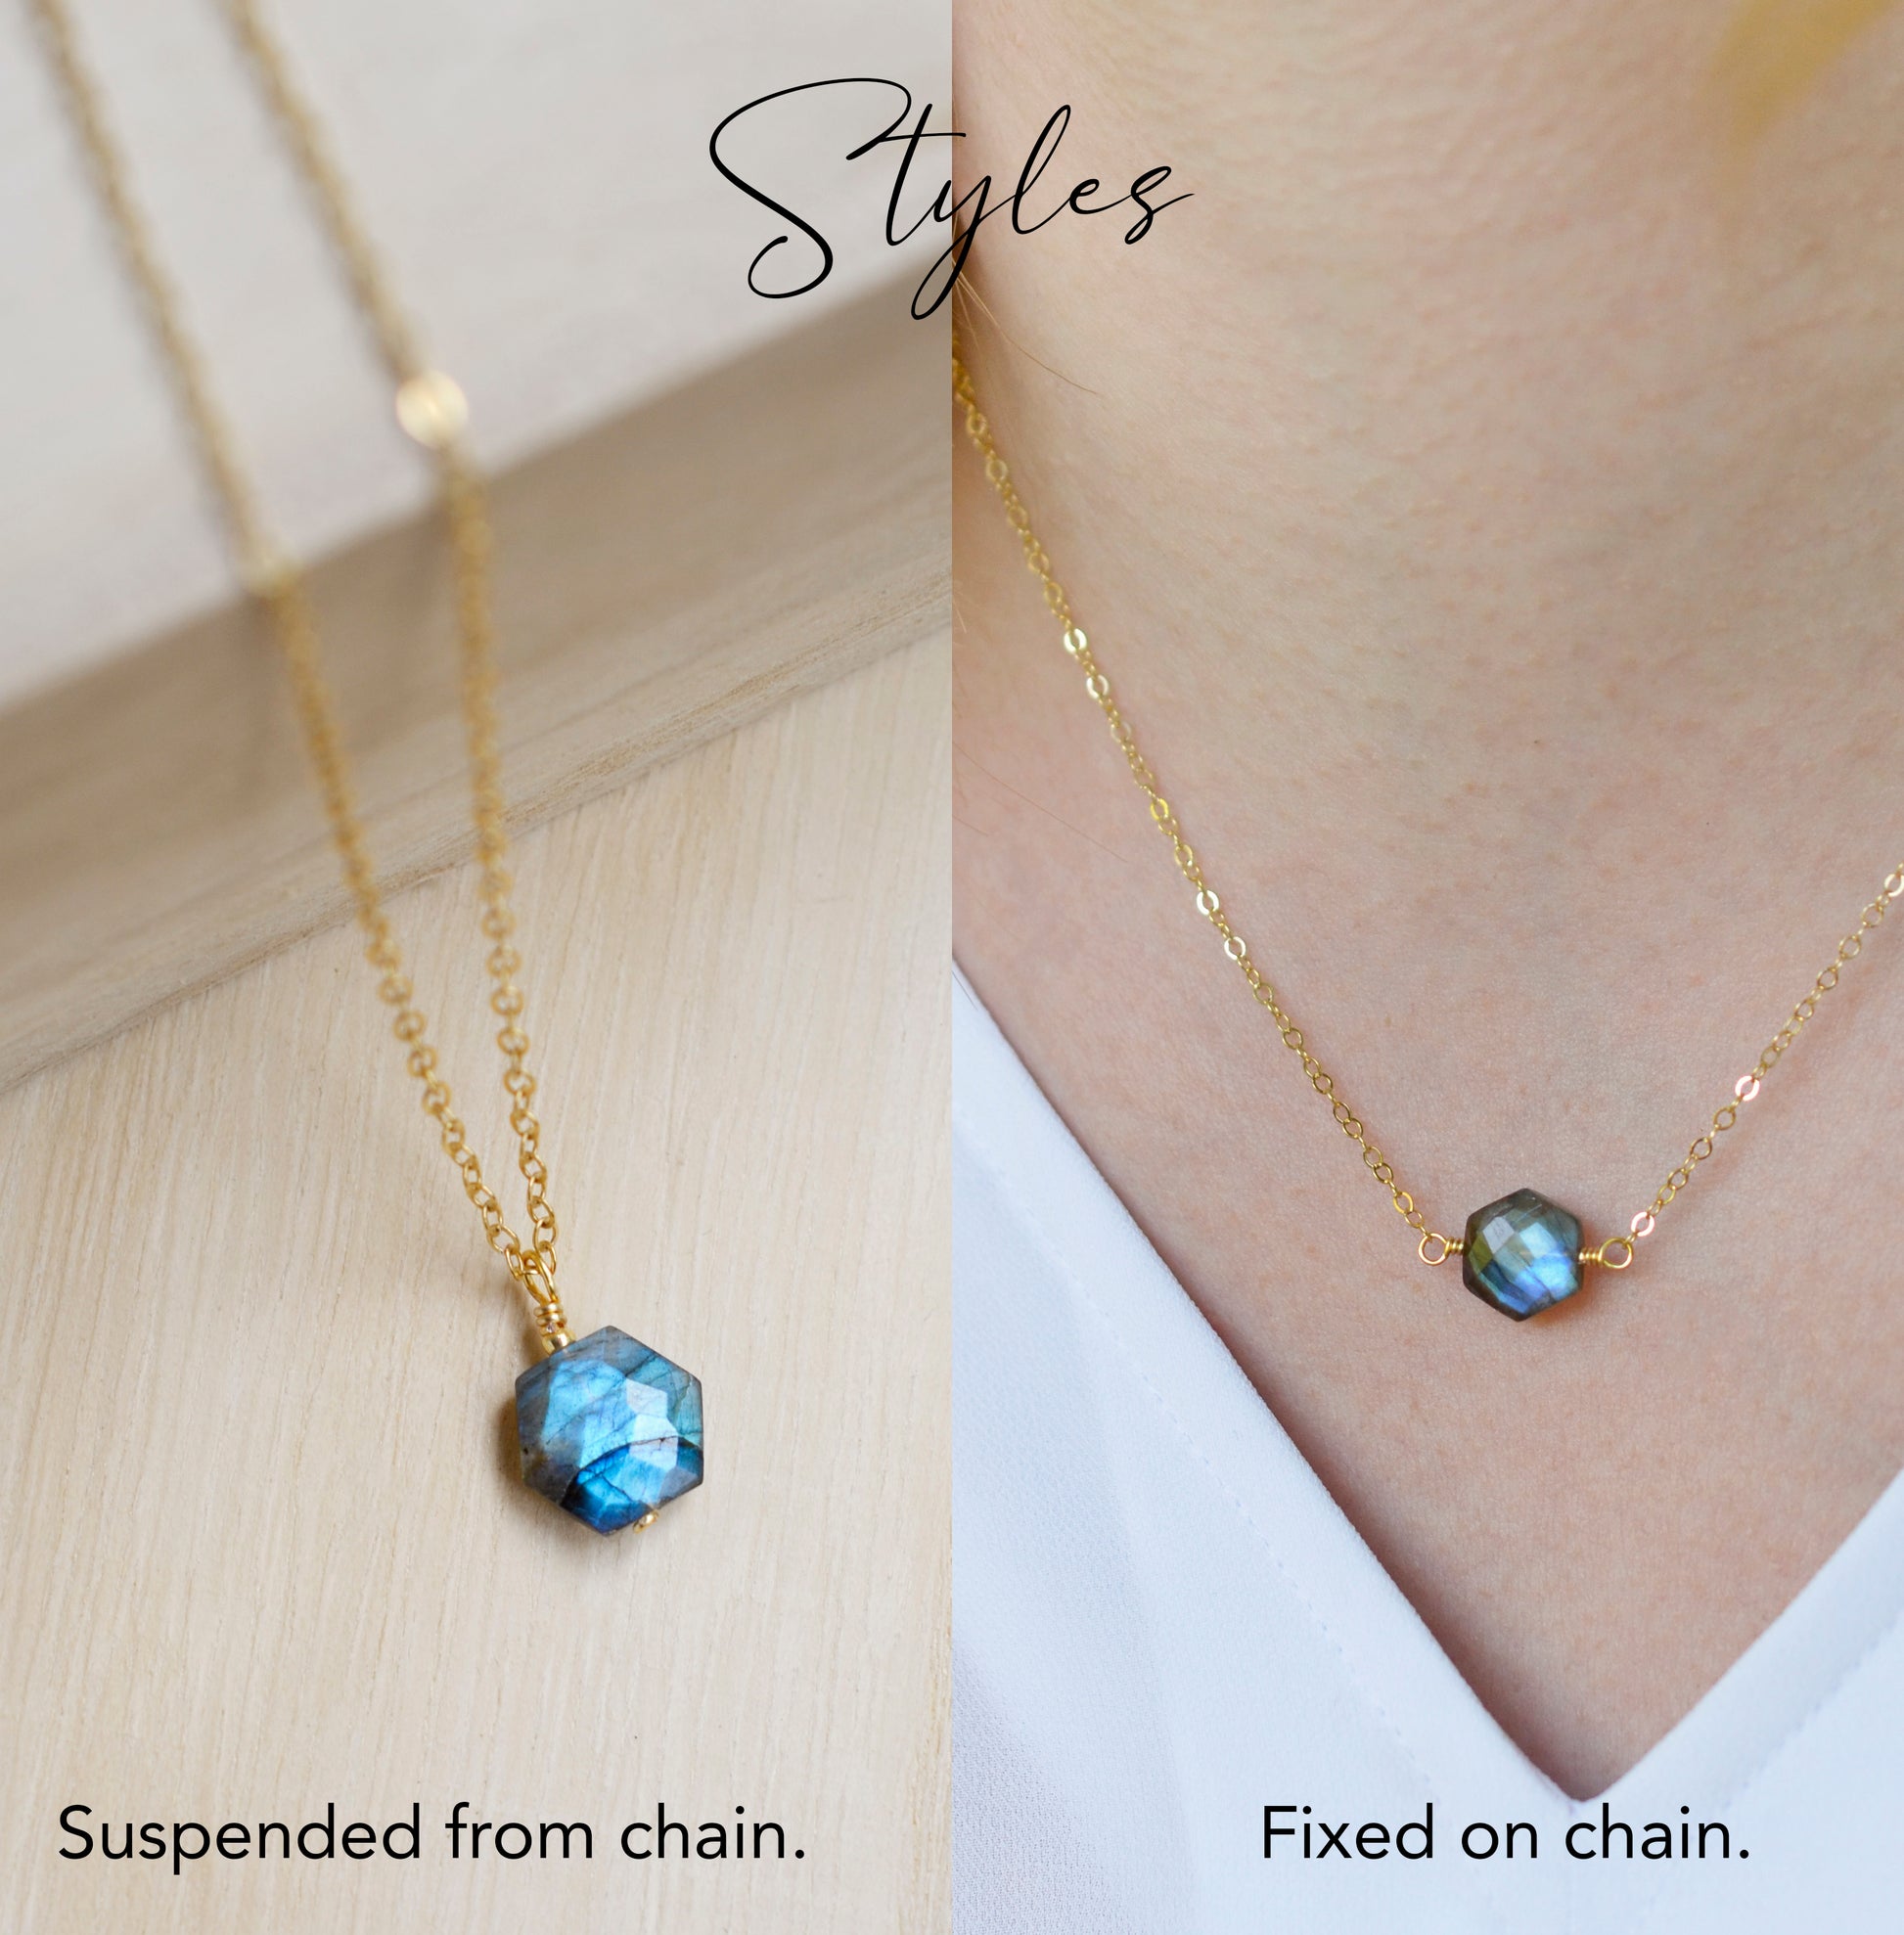 Blue flashing labradorite pendant cut into a hexagonal shape and suspended onto a gold chain. Two different styles shown.